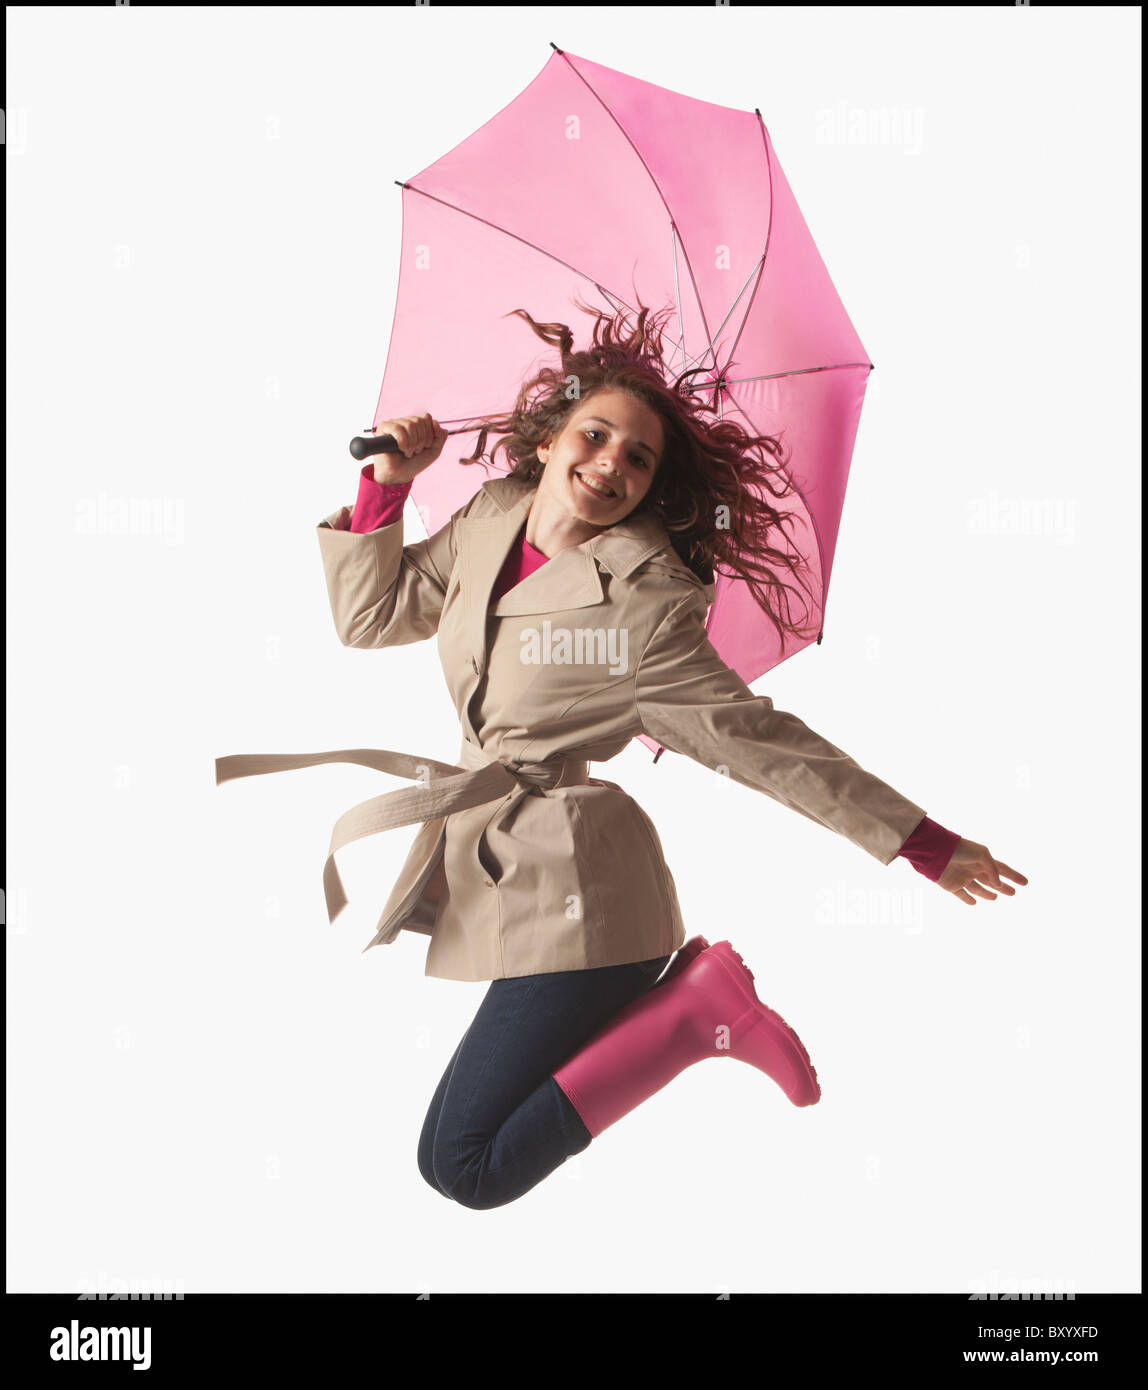 Woman with umbrella jumping on white background Stock Photo